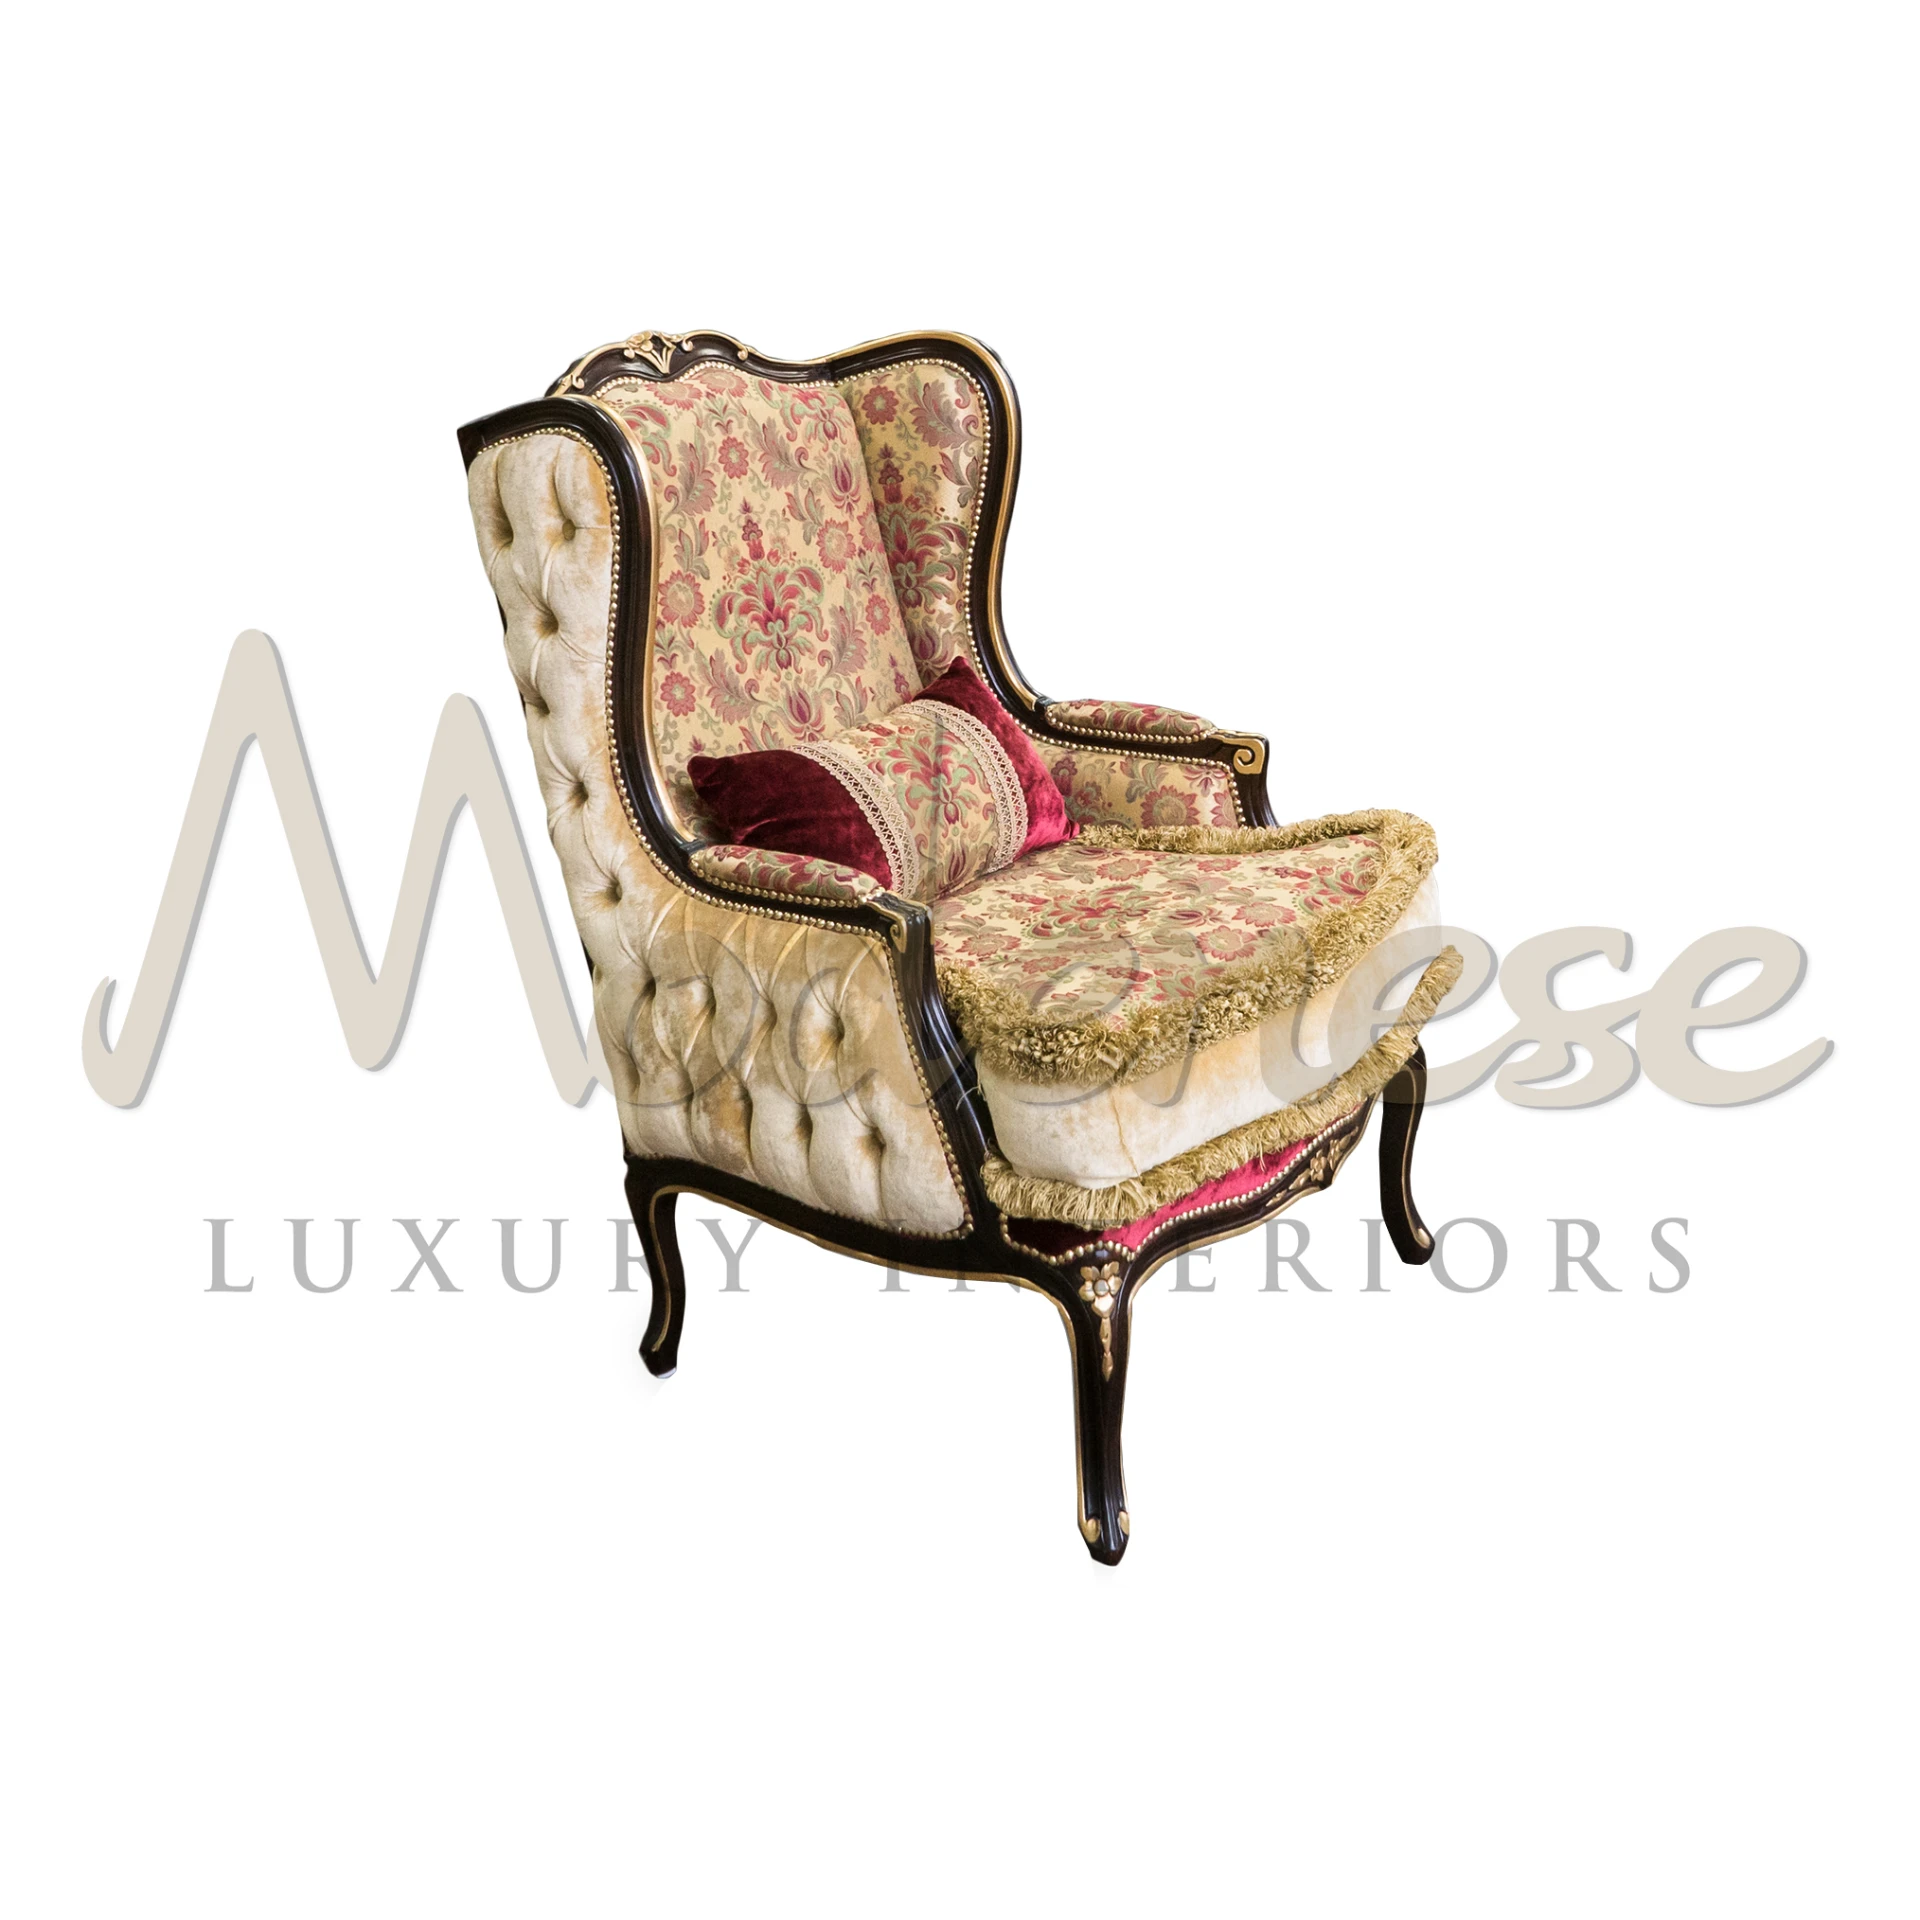 Timeless Charm: Classic Bergere Chair with Floral Capitonné Upholstery